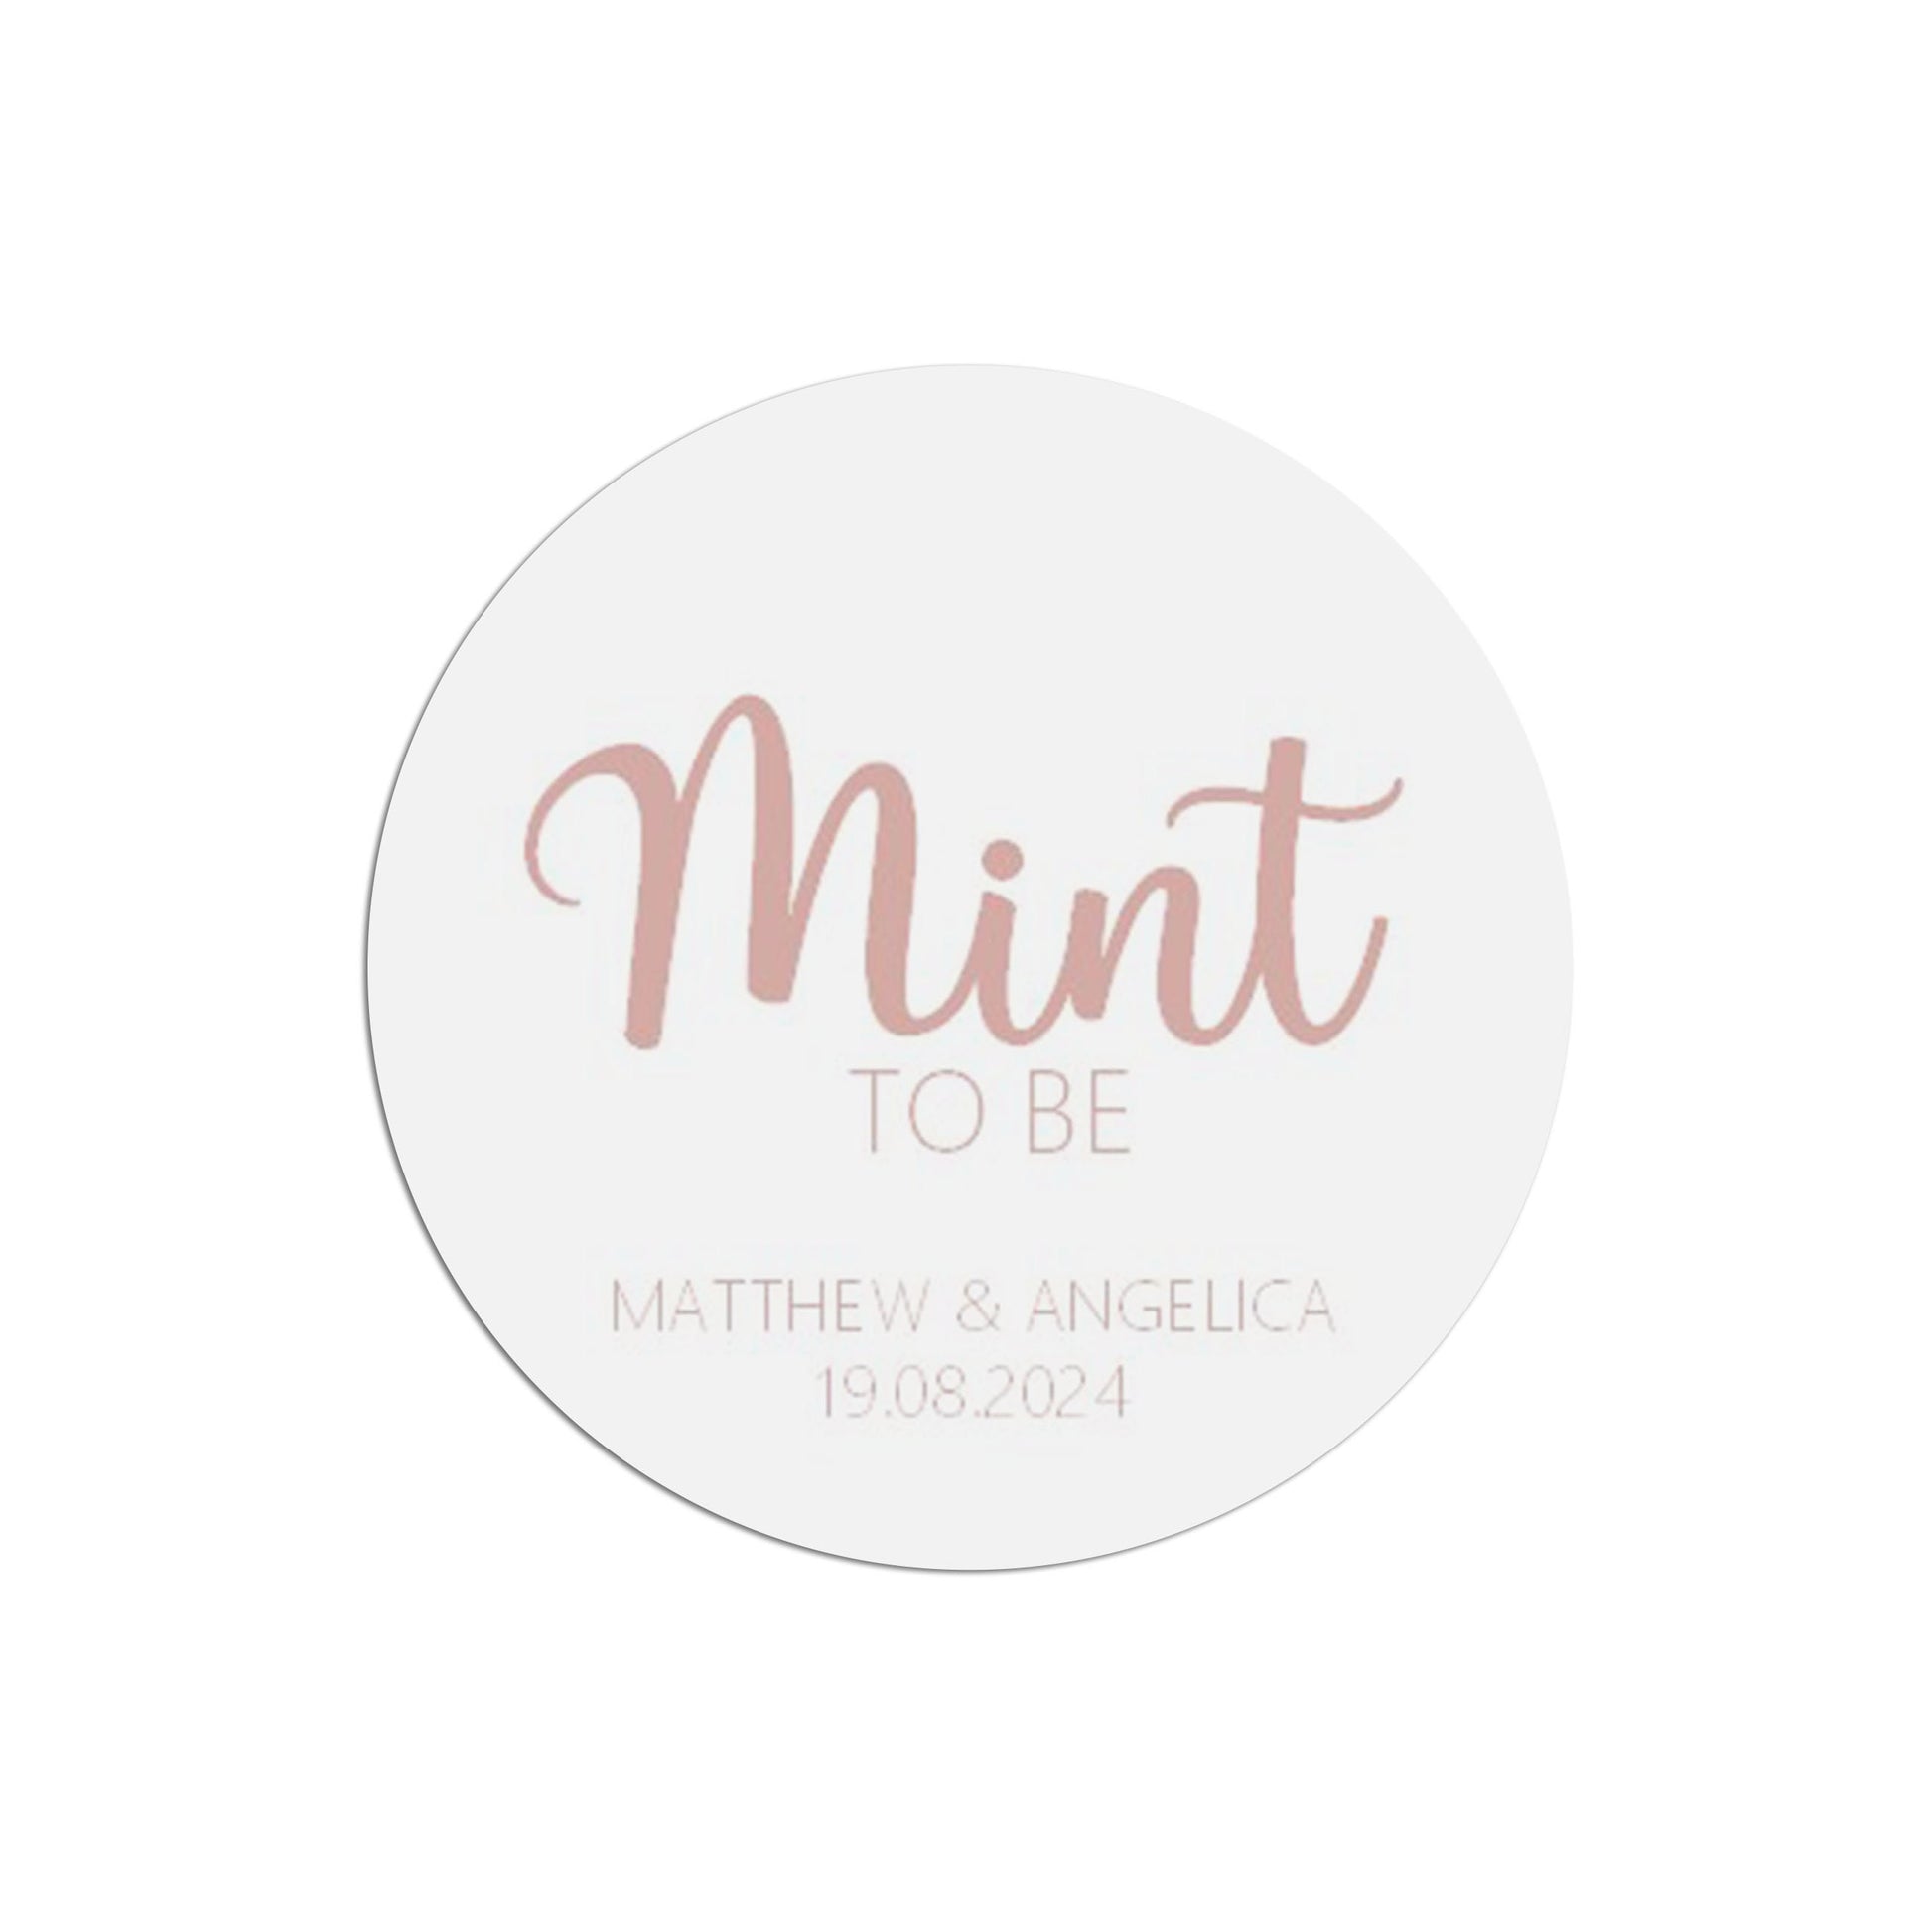 Mint To Be Wedding Sticker, Rose Gold Effect 37mm Round With Personalisation At The Bottom x 35 Stickers Per Sheet